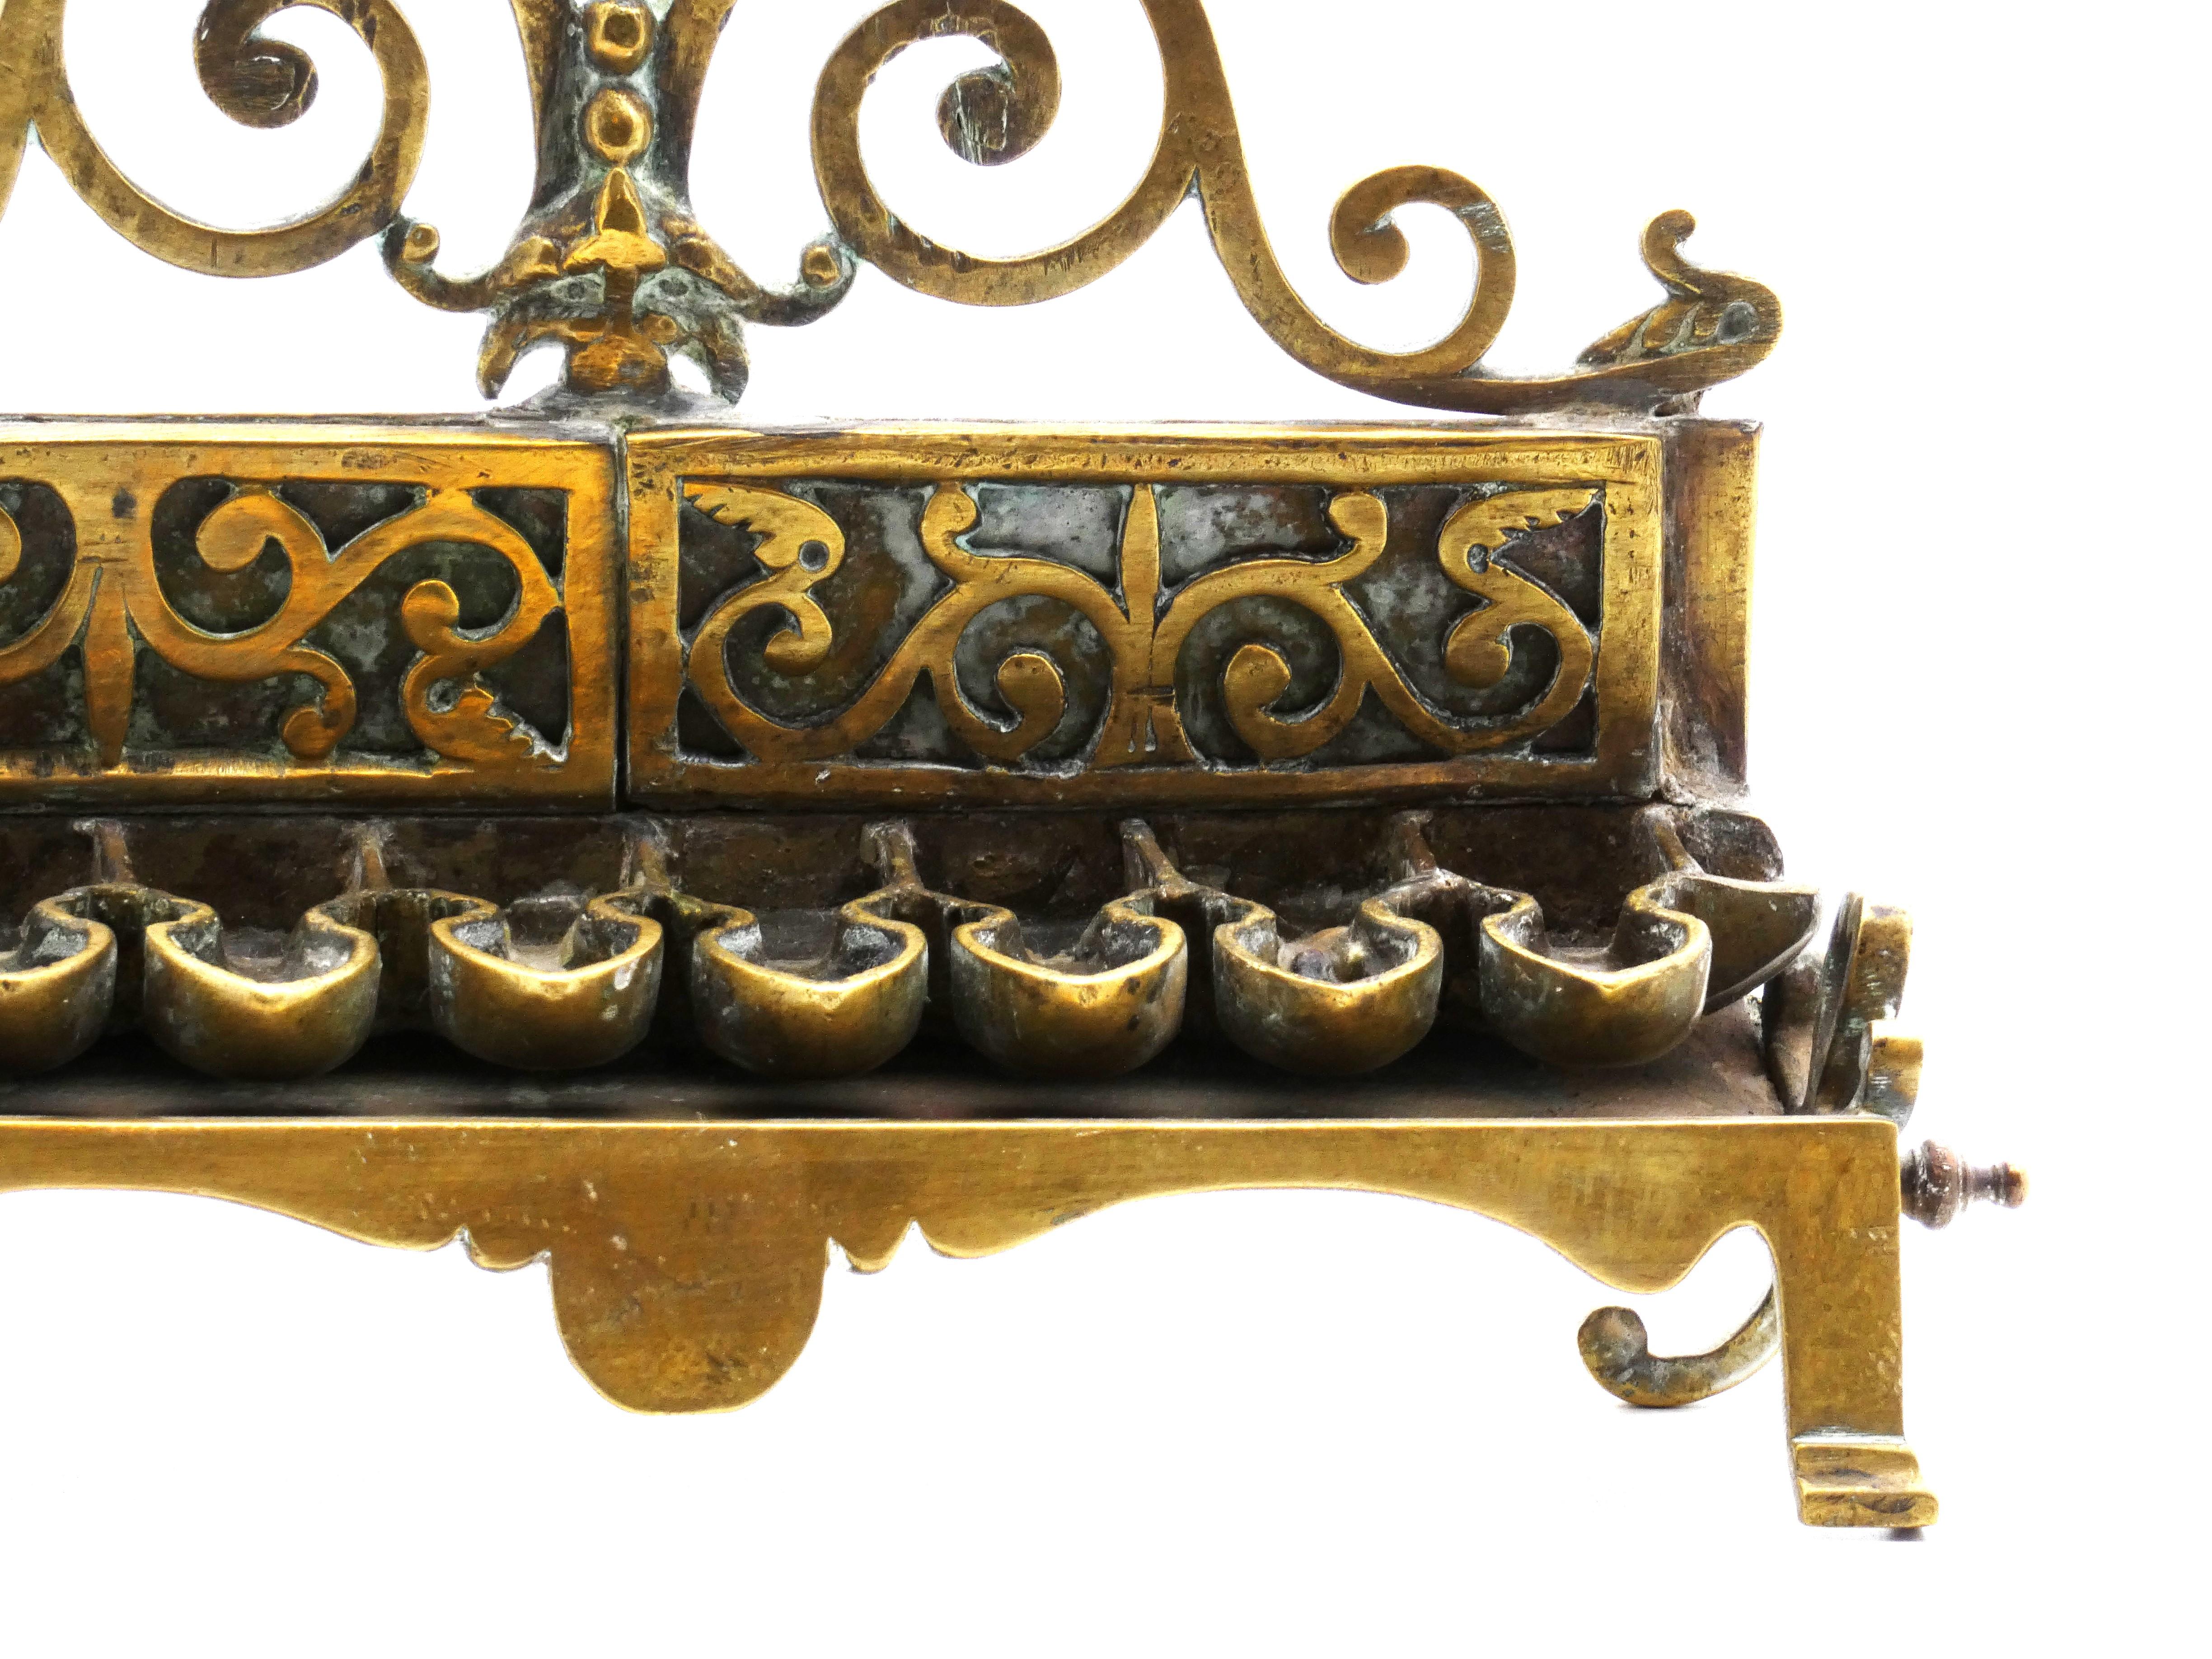 Hanukkah Lamp is interestingly made with many different classical shapes and parts. 

At top, a pierced fleur de-lis surmounted on scrolling rails is mounted atop a similarly pierced backplate attached to the main frame. 

Each square lamp